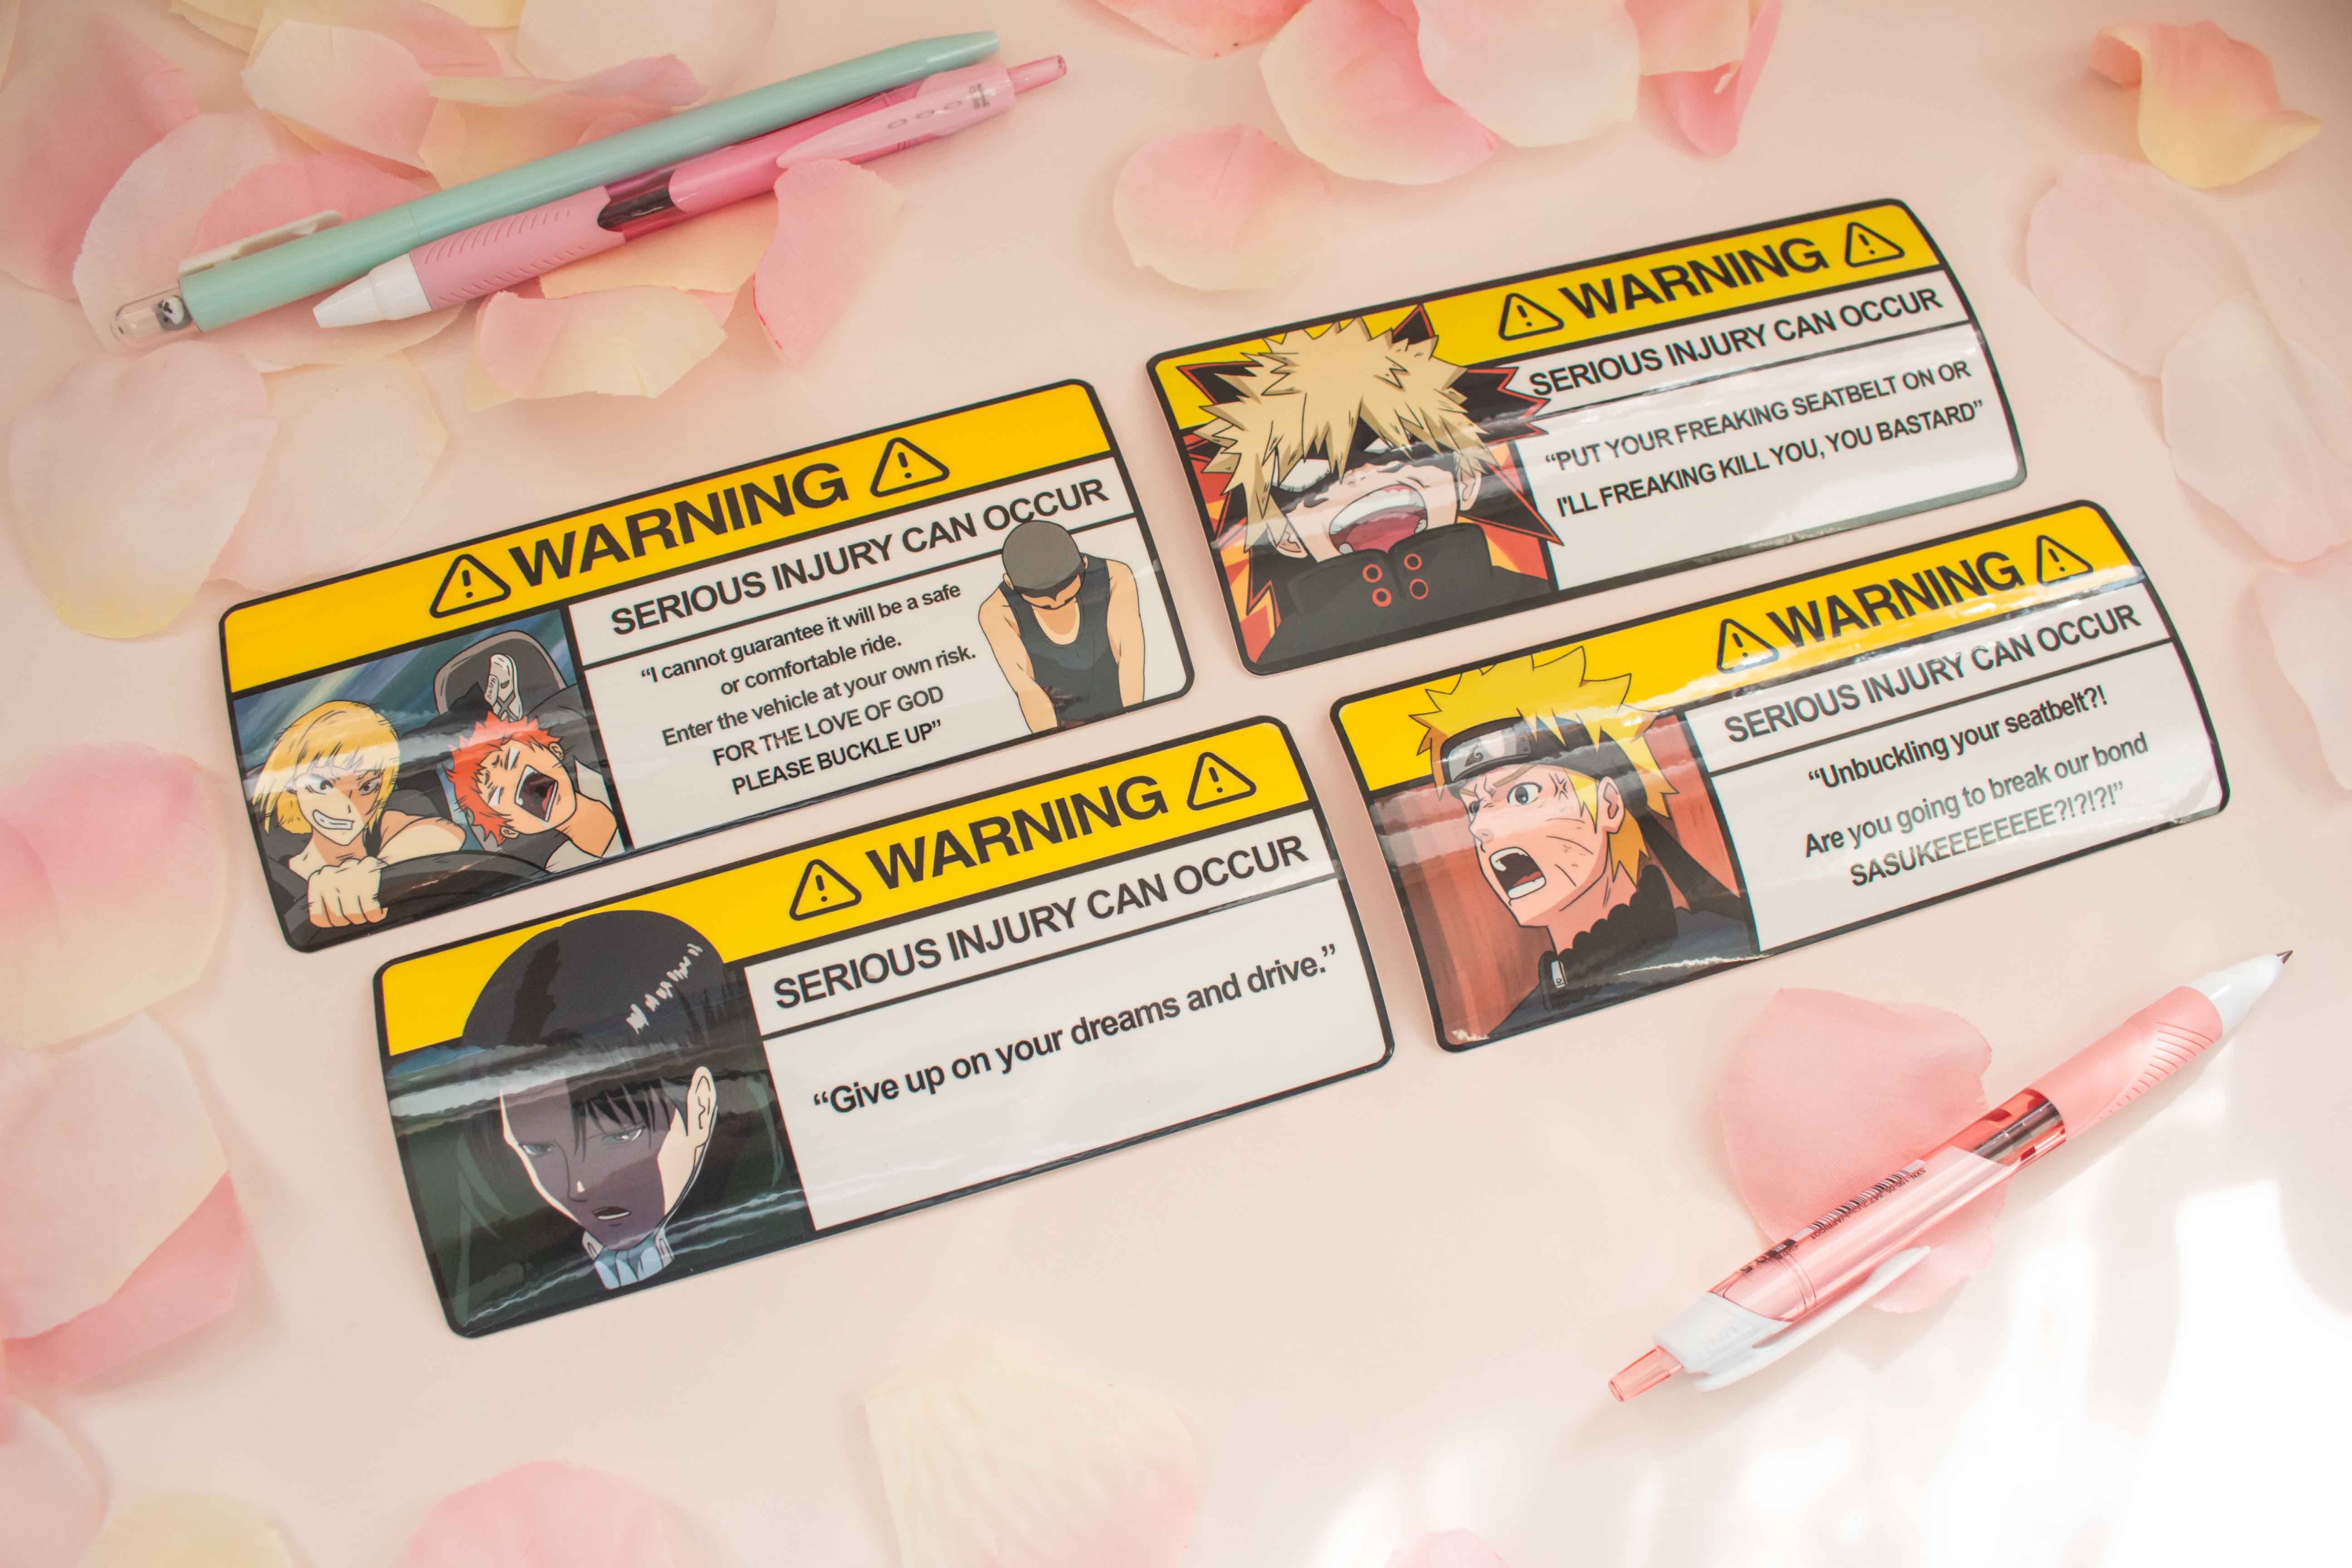 Anime Warning Signs You Are Entering An Otaku's Zone Sticker for Sale by  Animangapoi